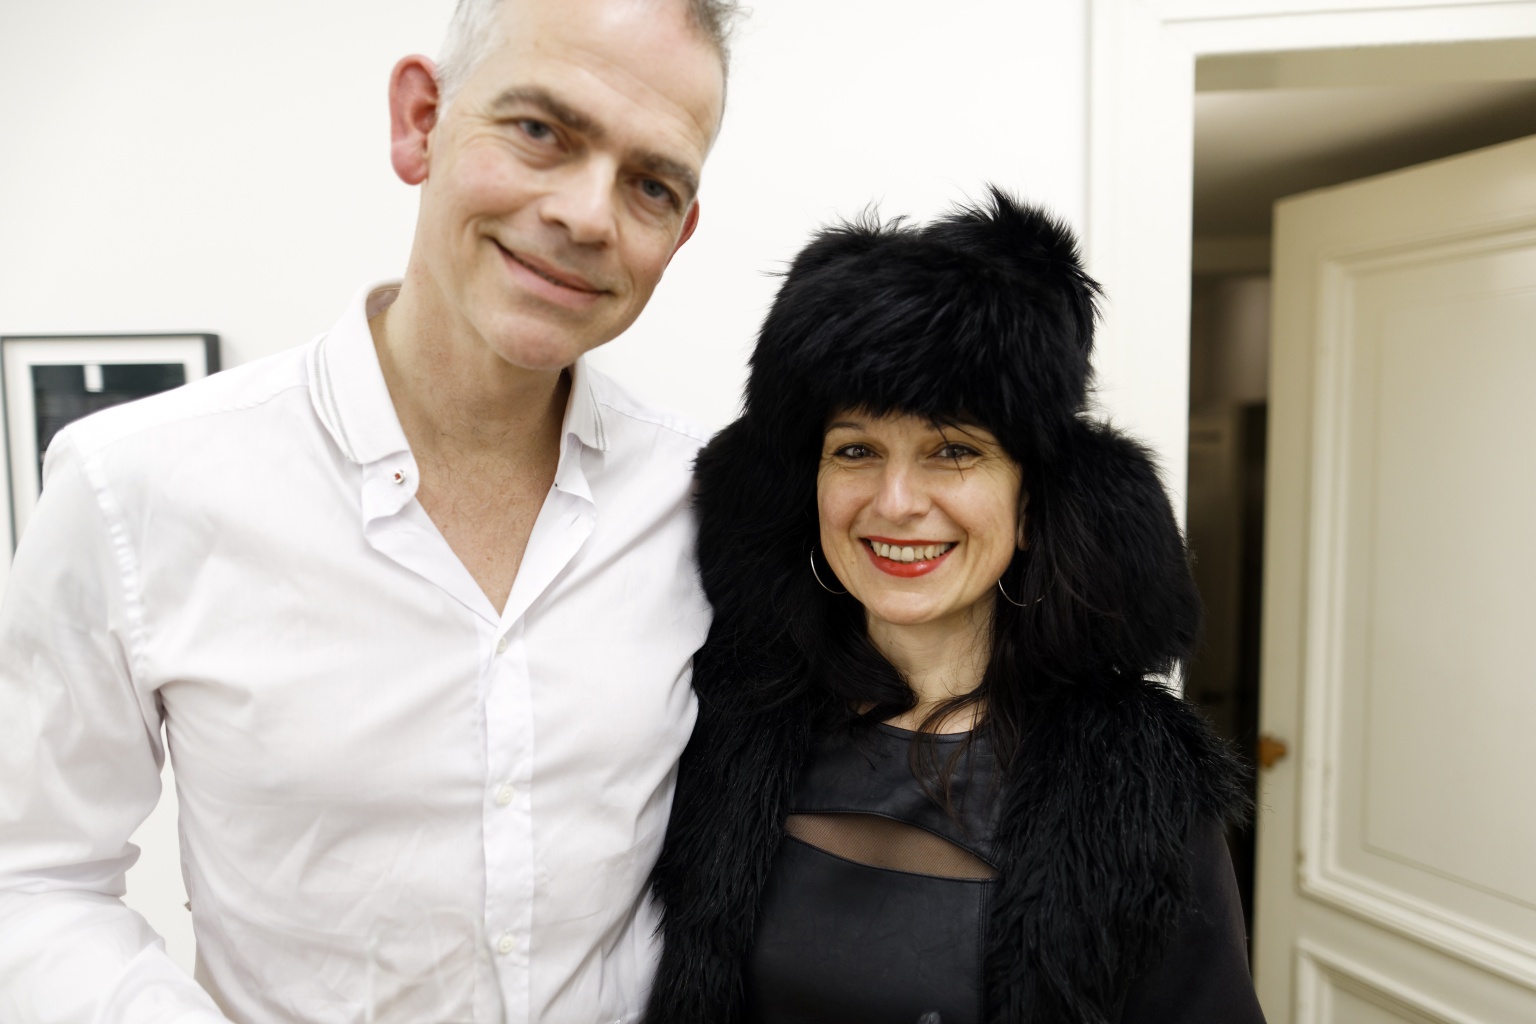 Dirk Jan and Valentina Lacmanovic<span style="font-weight: bold;"></span>